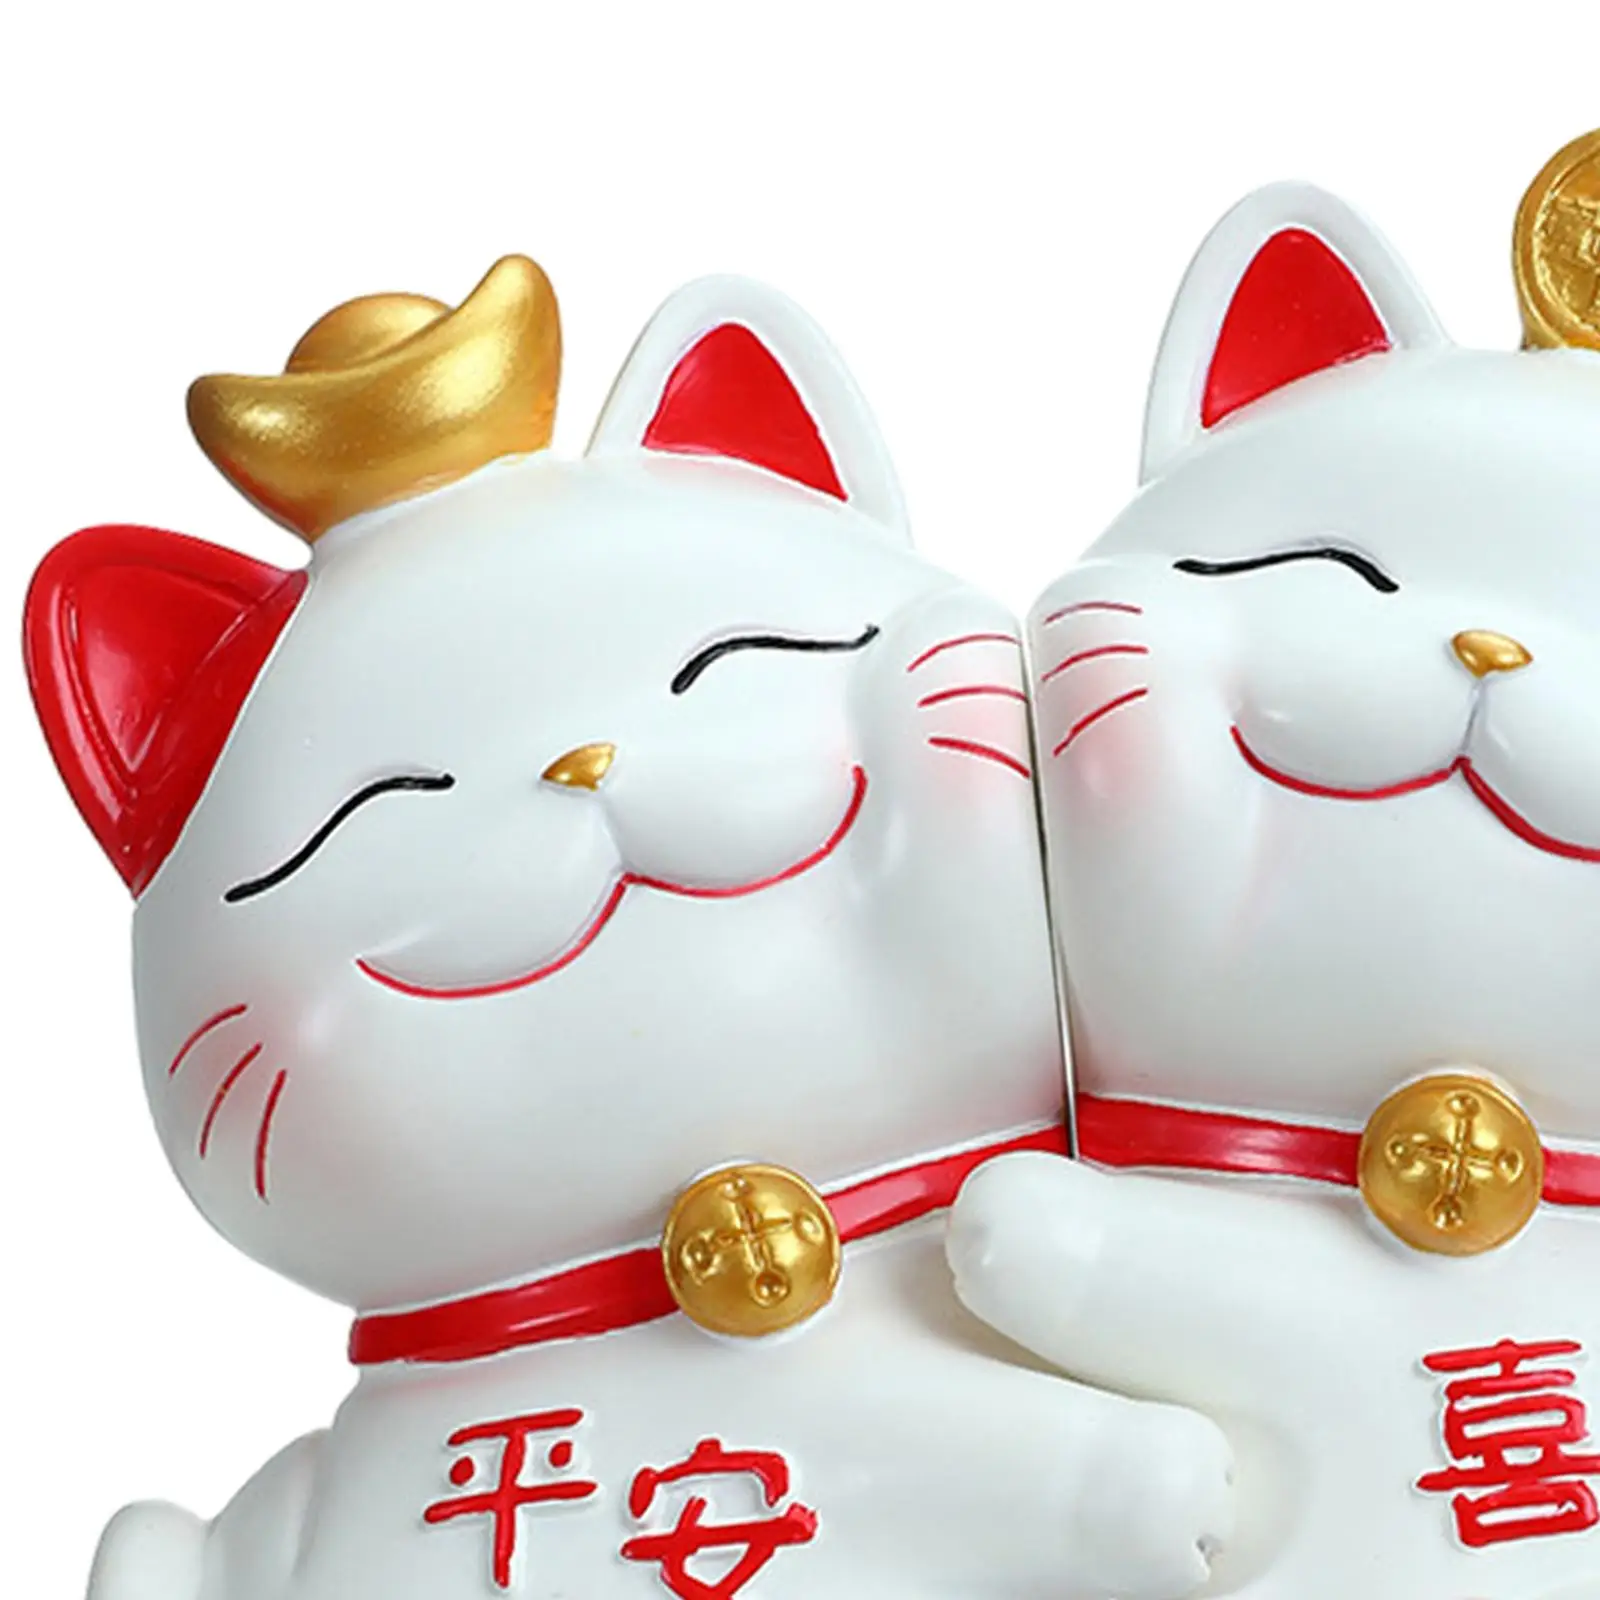 Book Ends Holiday Gifts Chinese Cat Statues for Living Room Desktop Home